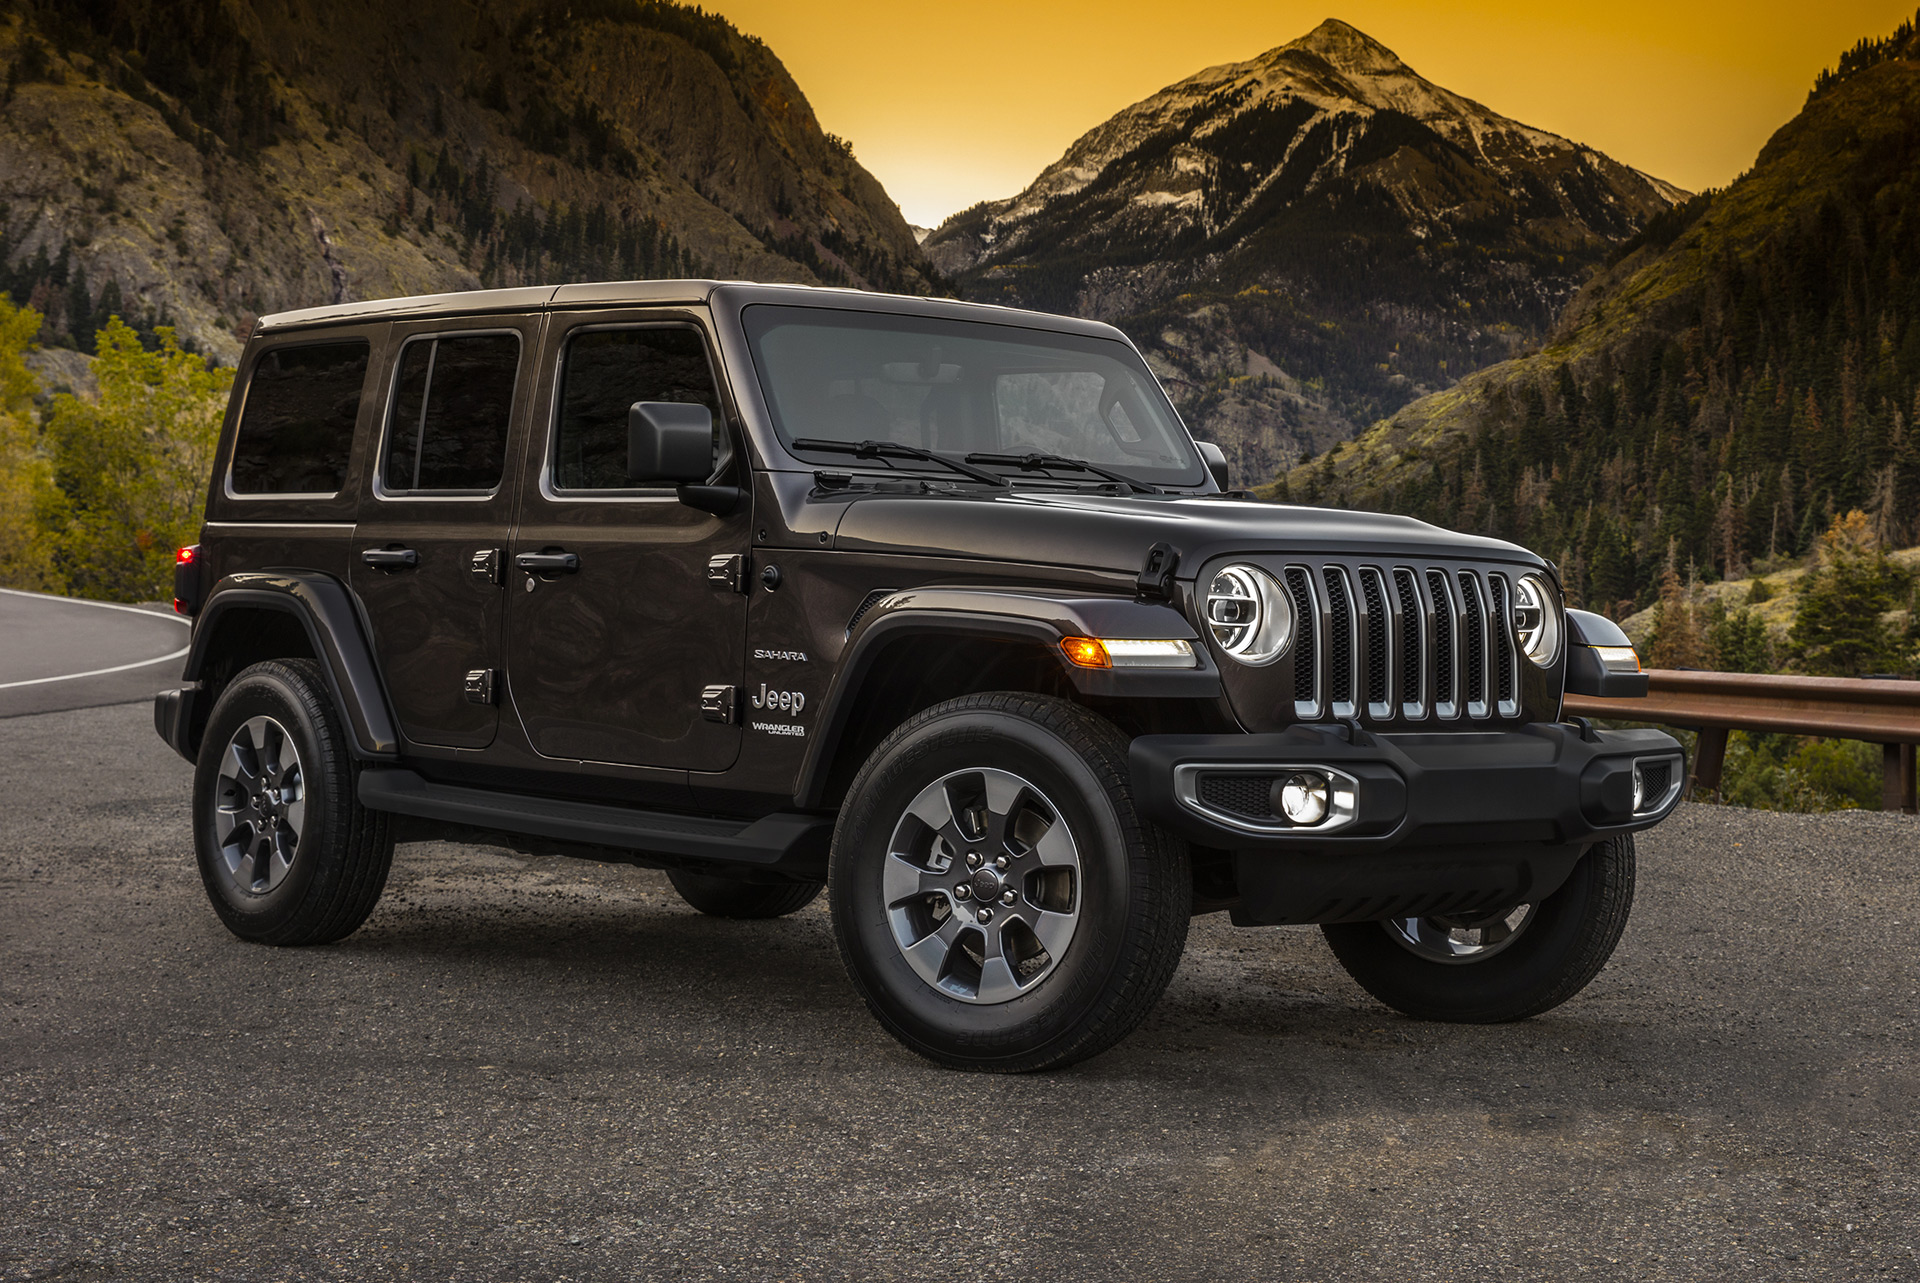 New 2018 Jeep Wrangler boosts fuel economy, from bad to less bad